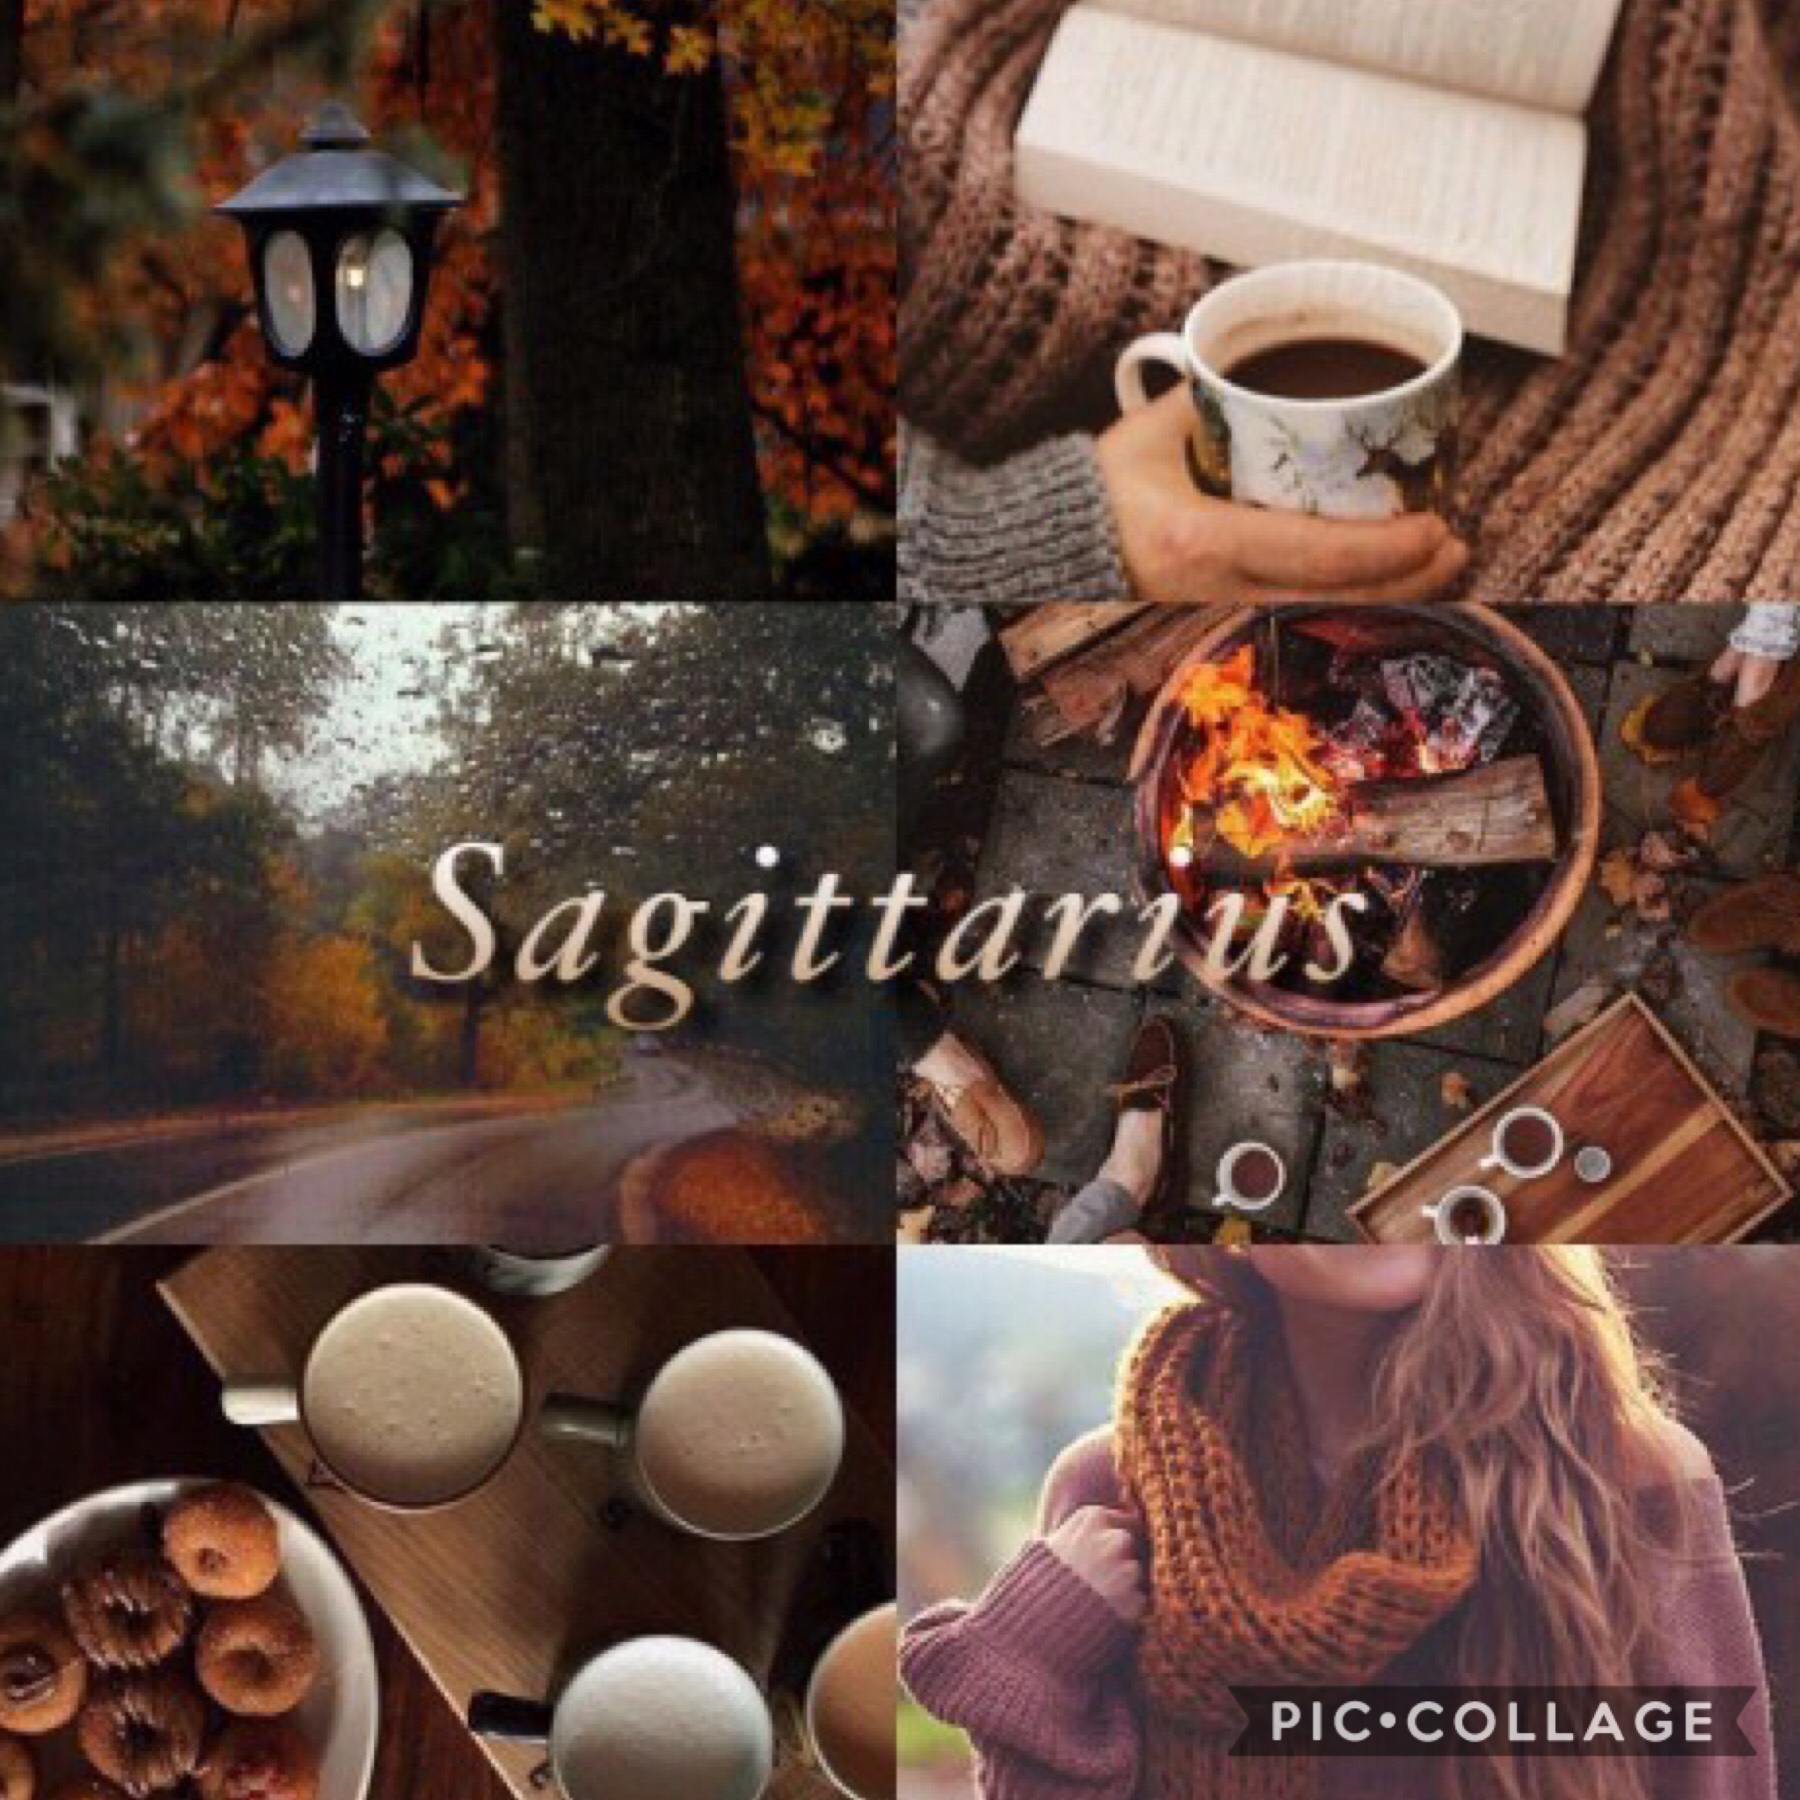 No wonder I’m so drawn to Fall! I’m a Sagittarius 🧡💛 WhAt are you?